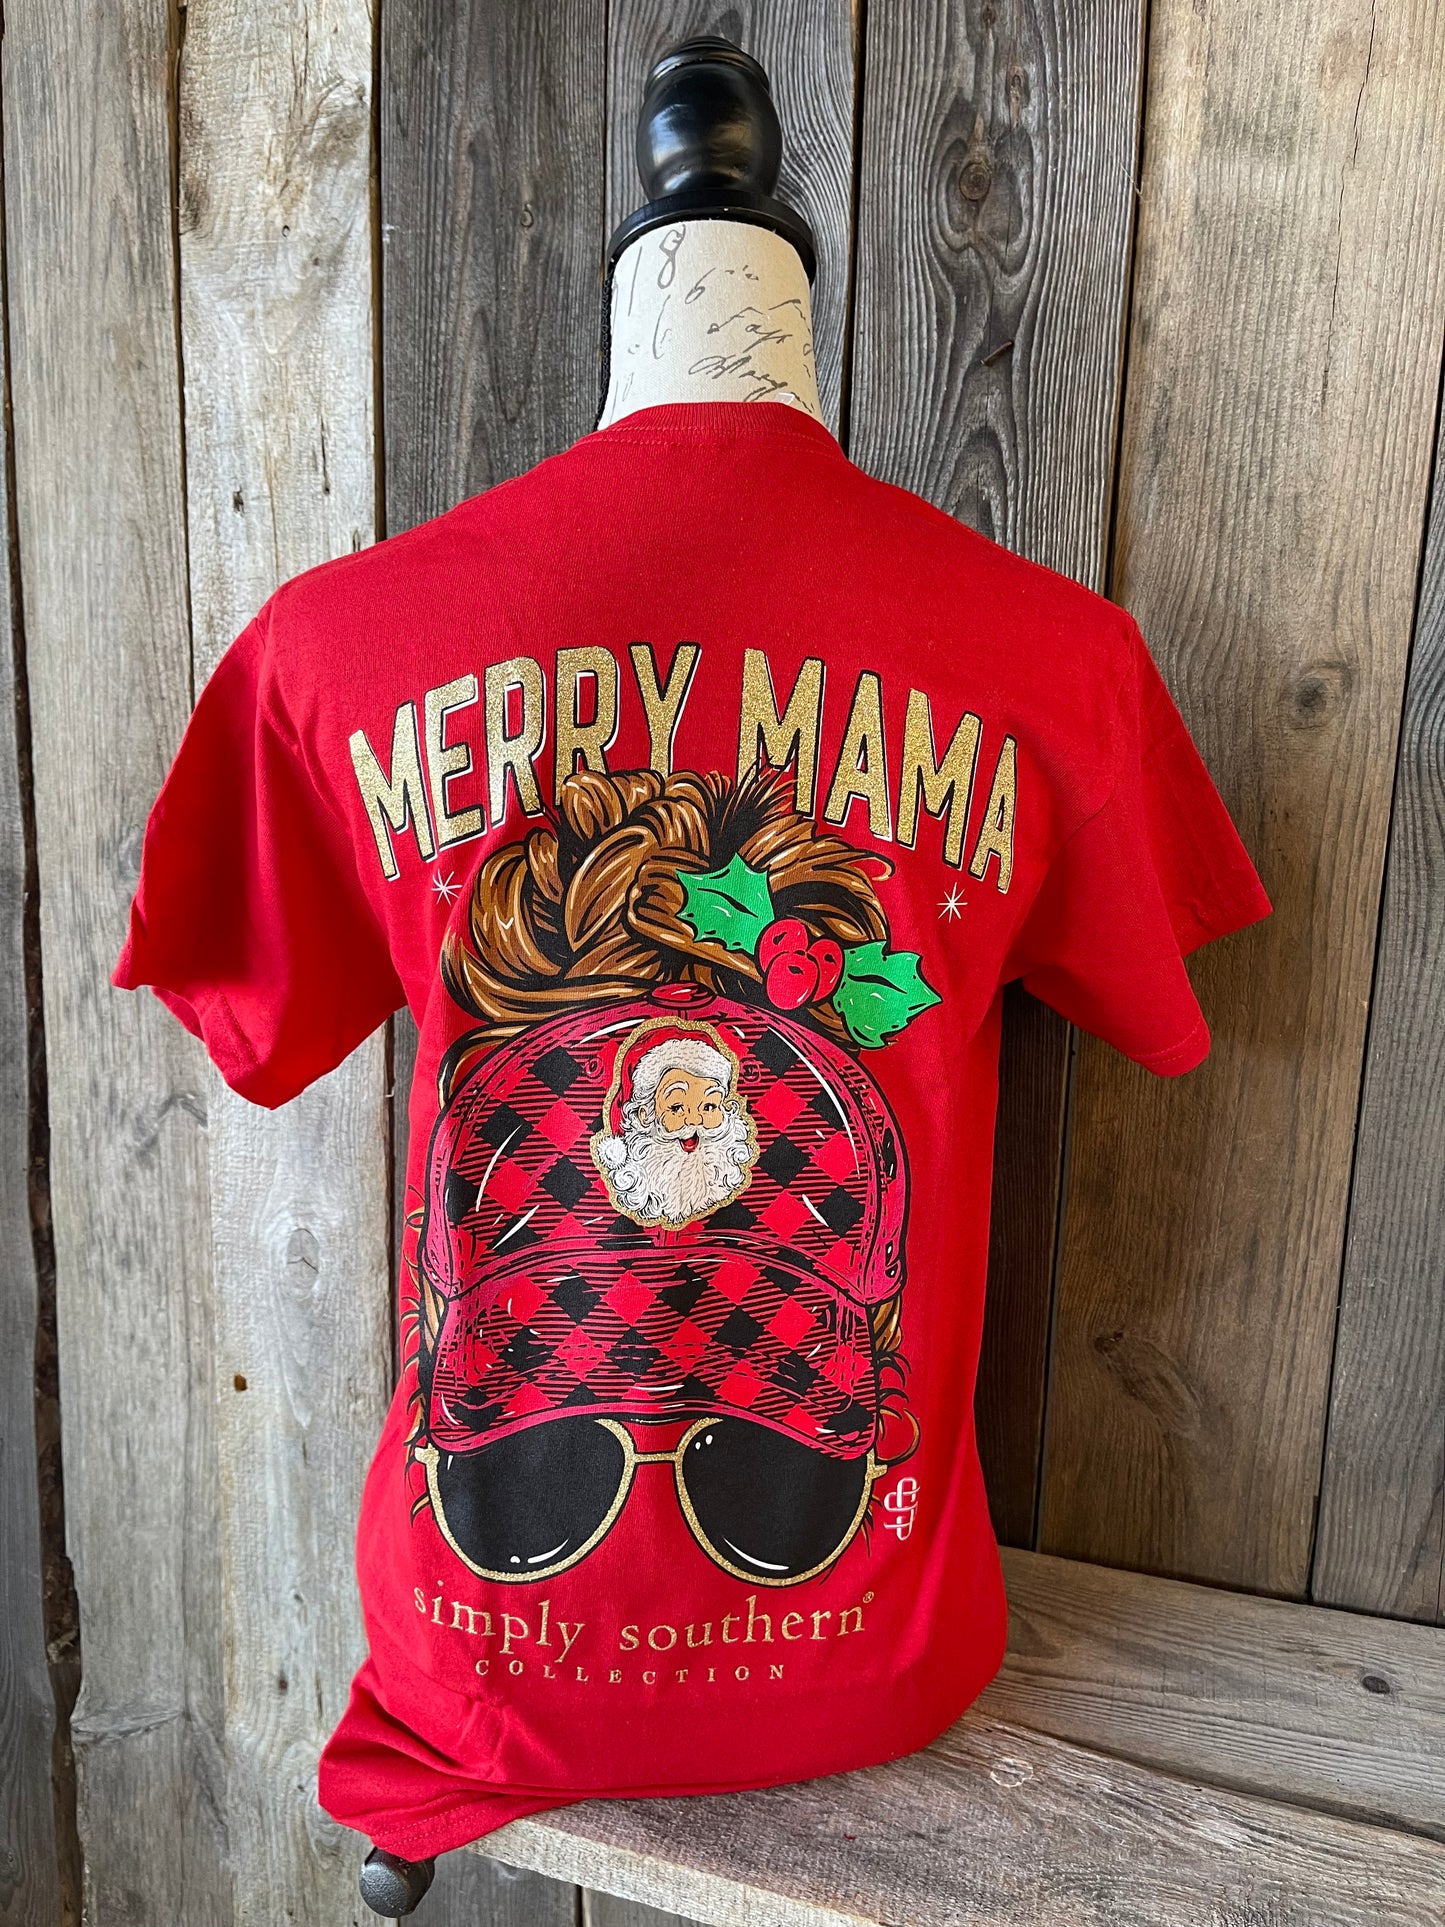 Simply Southern - Merry Mama Tee